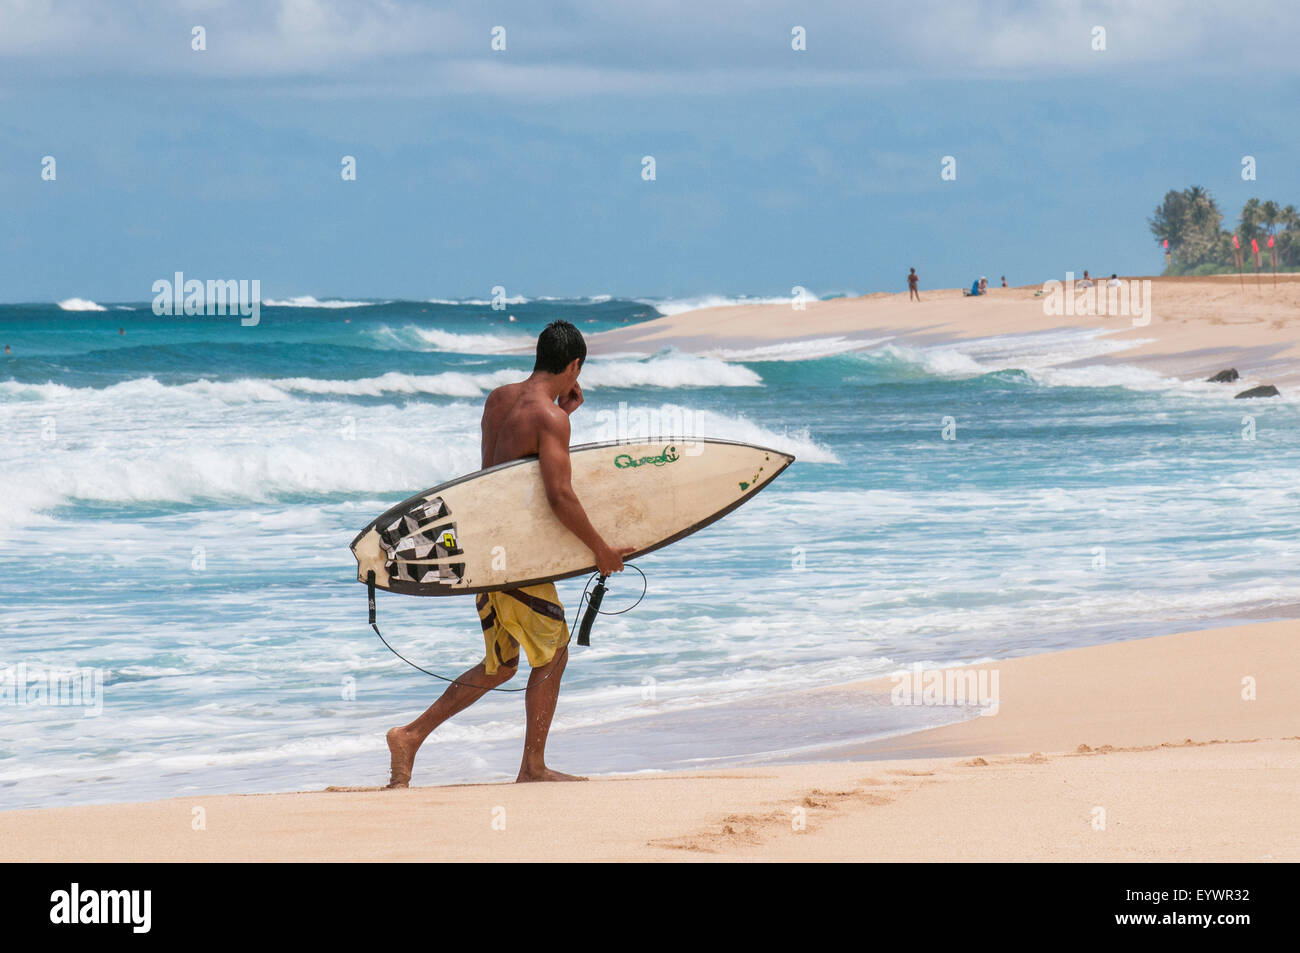 Surfing at Sunset Beach, North Shore, Oahu, Hawaii, United States of America, Pacific Stock Photo